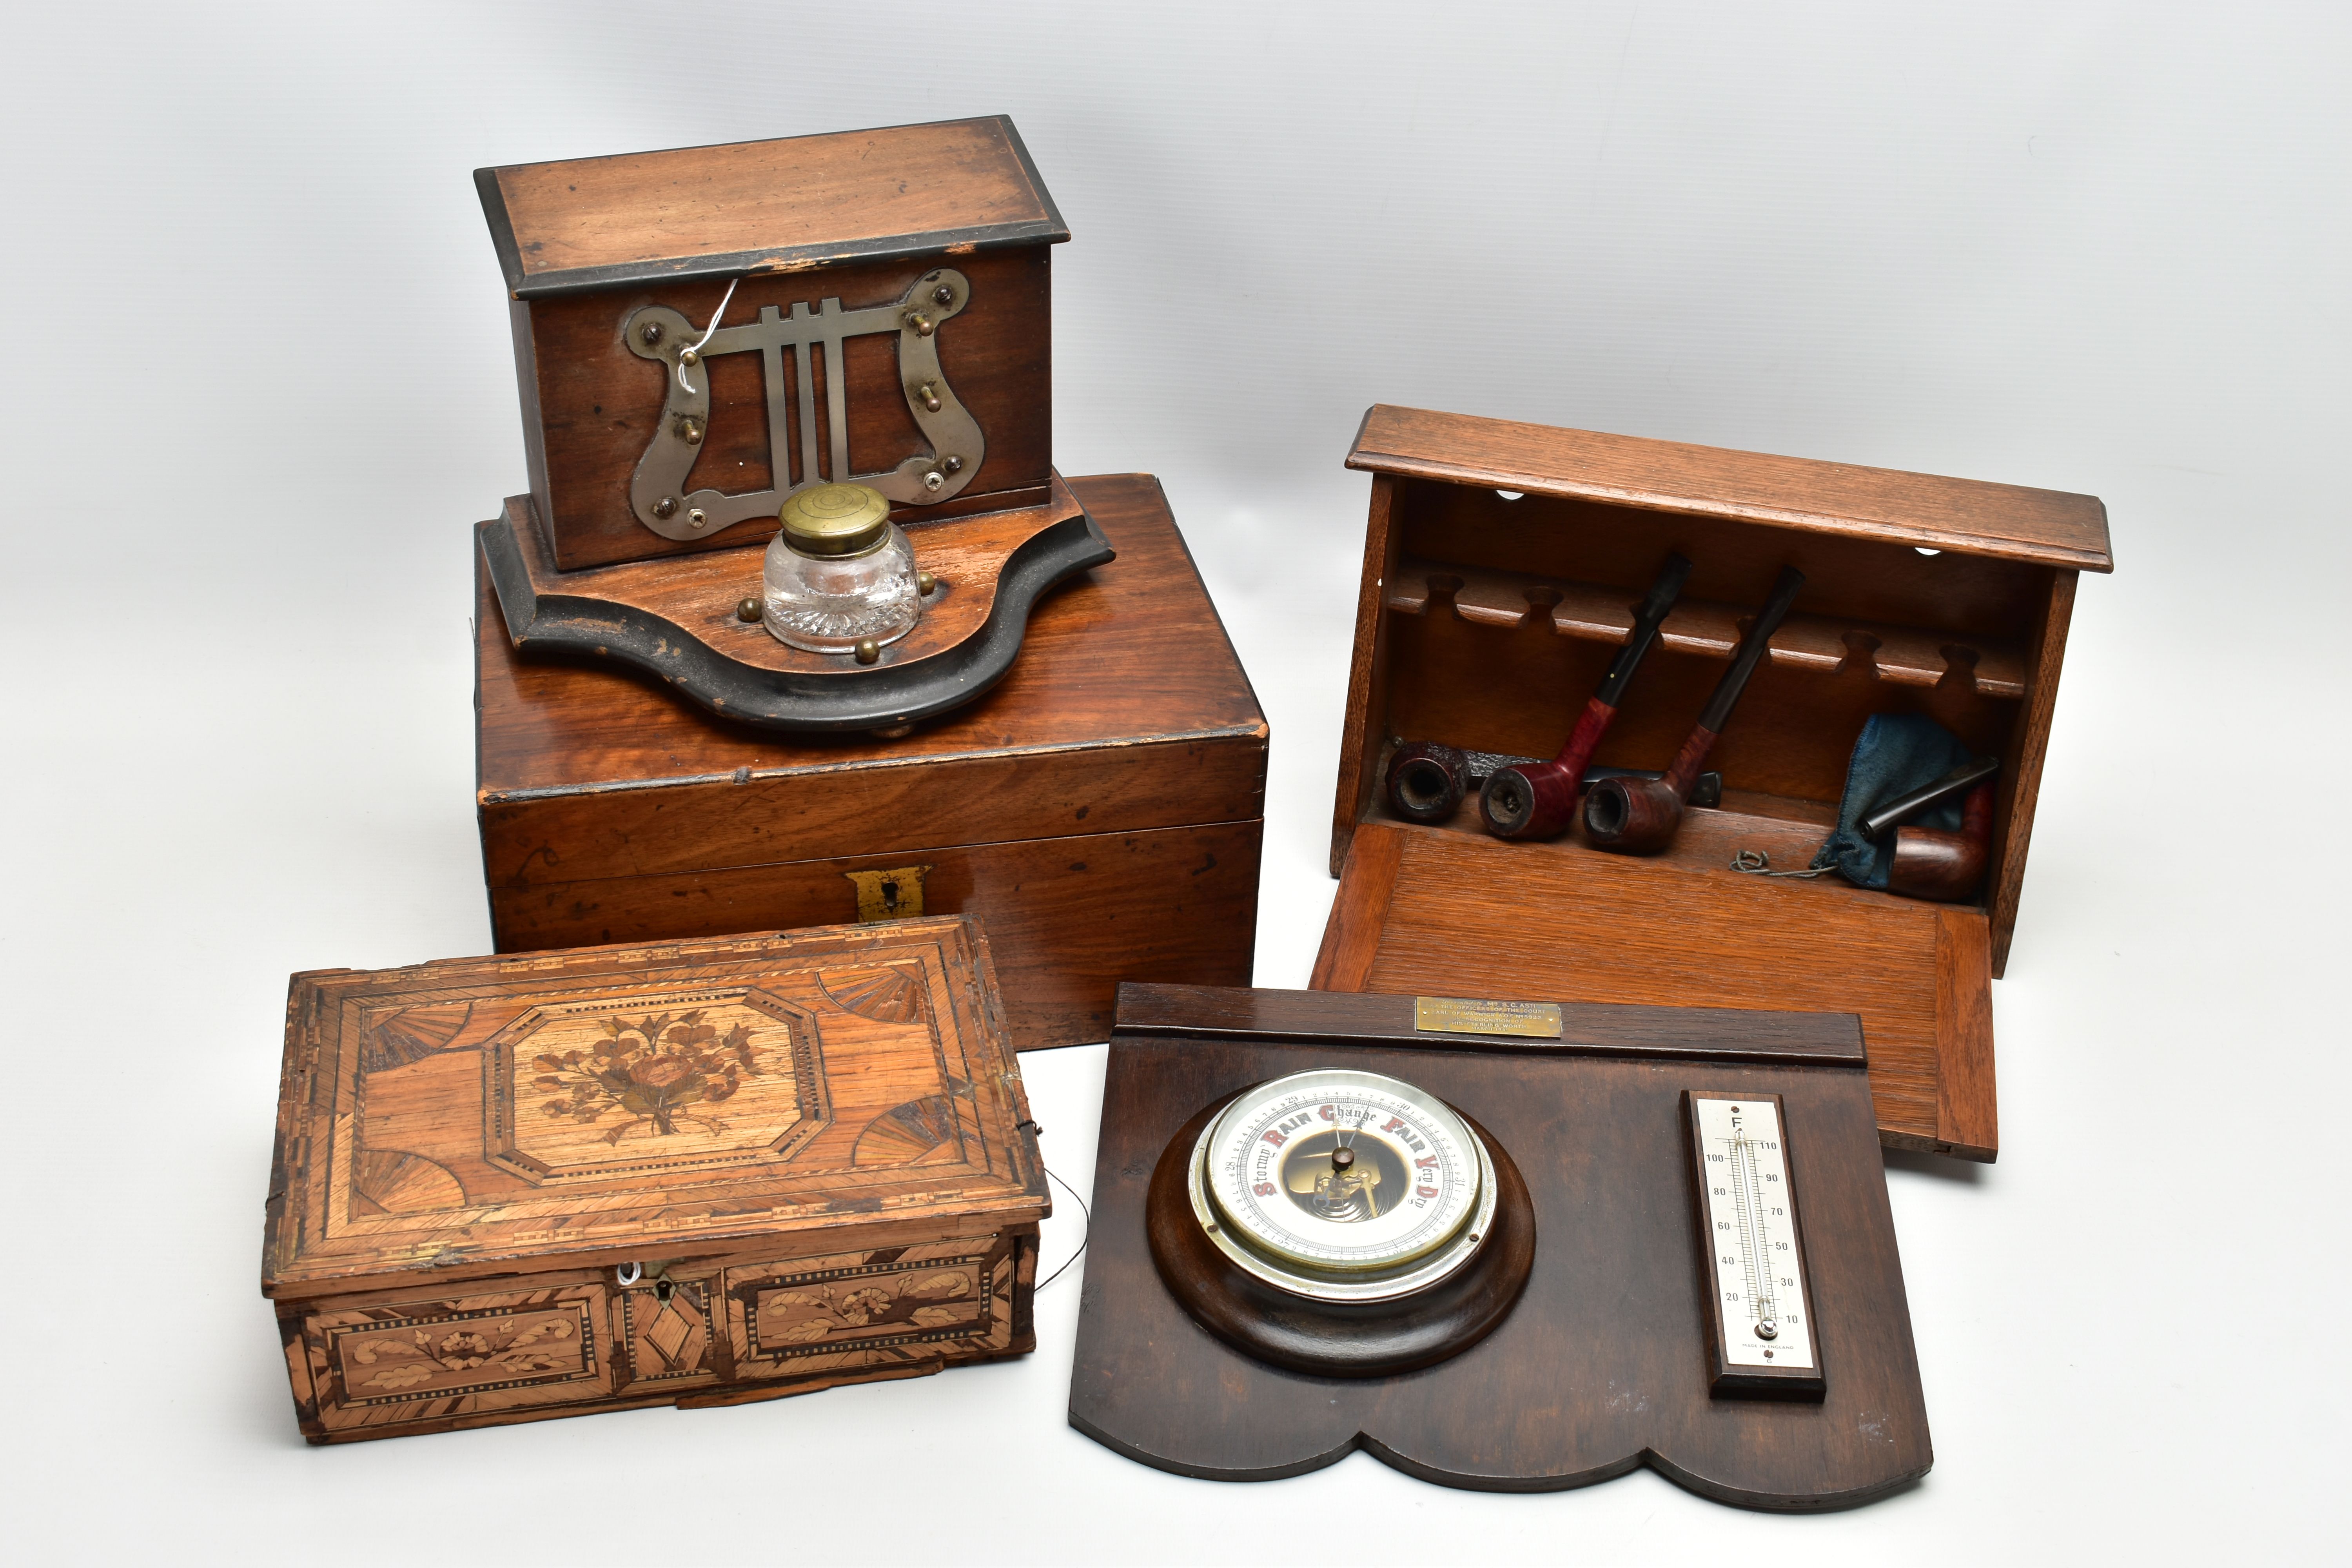 A GROUP OF FIVE 19TH AND 20TH CENTURY BOXES / BAROMETER, comprising a Napoleonic Prisoner of War